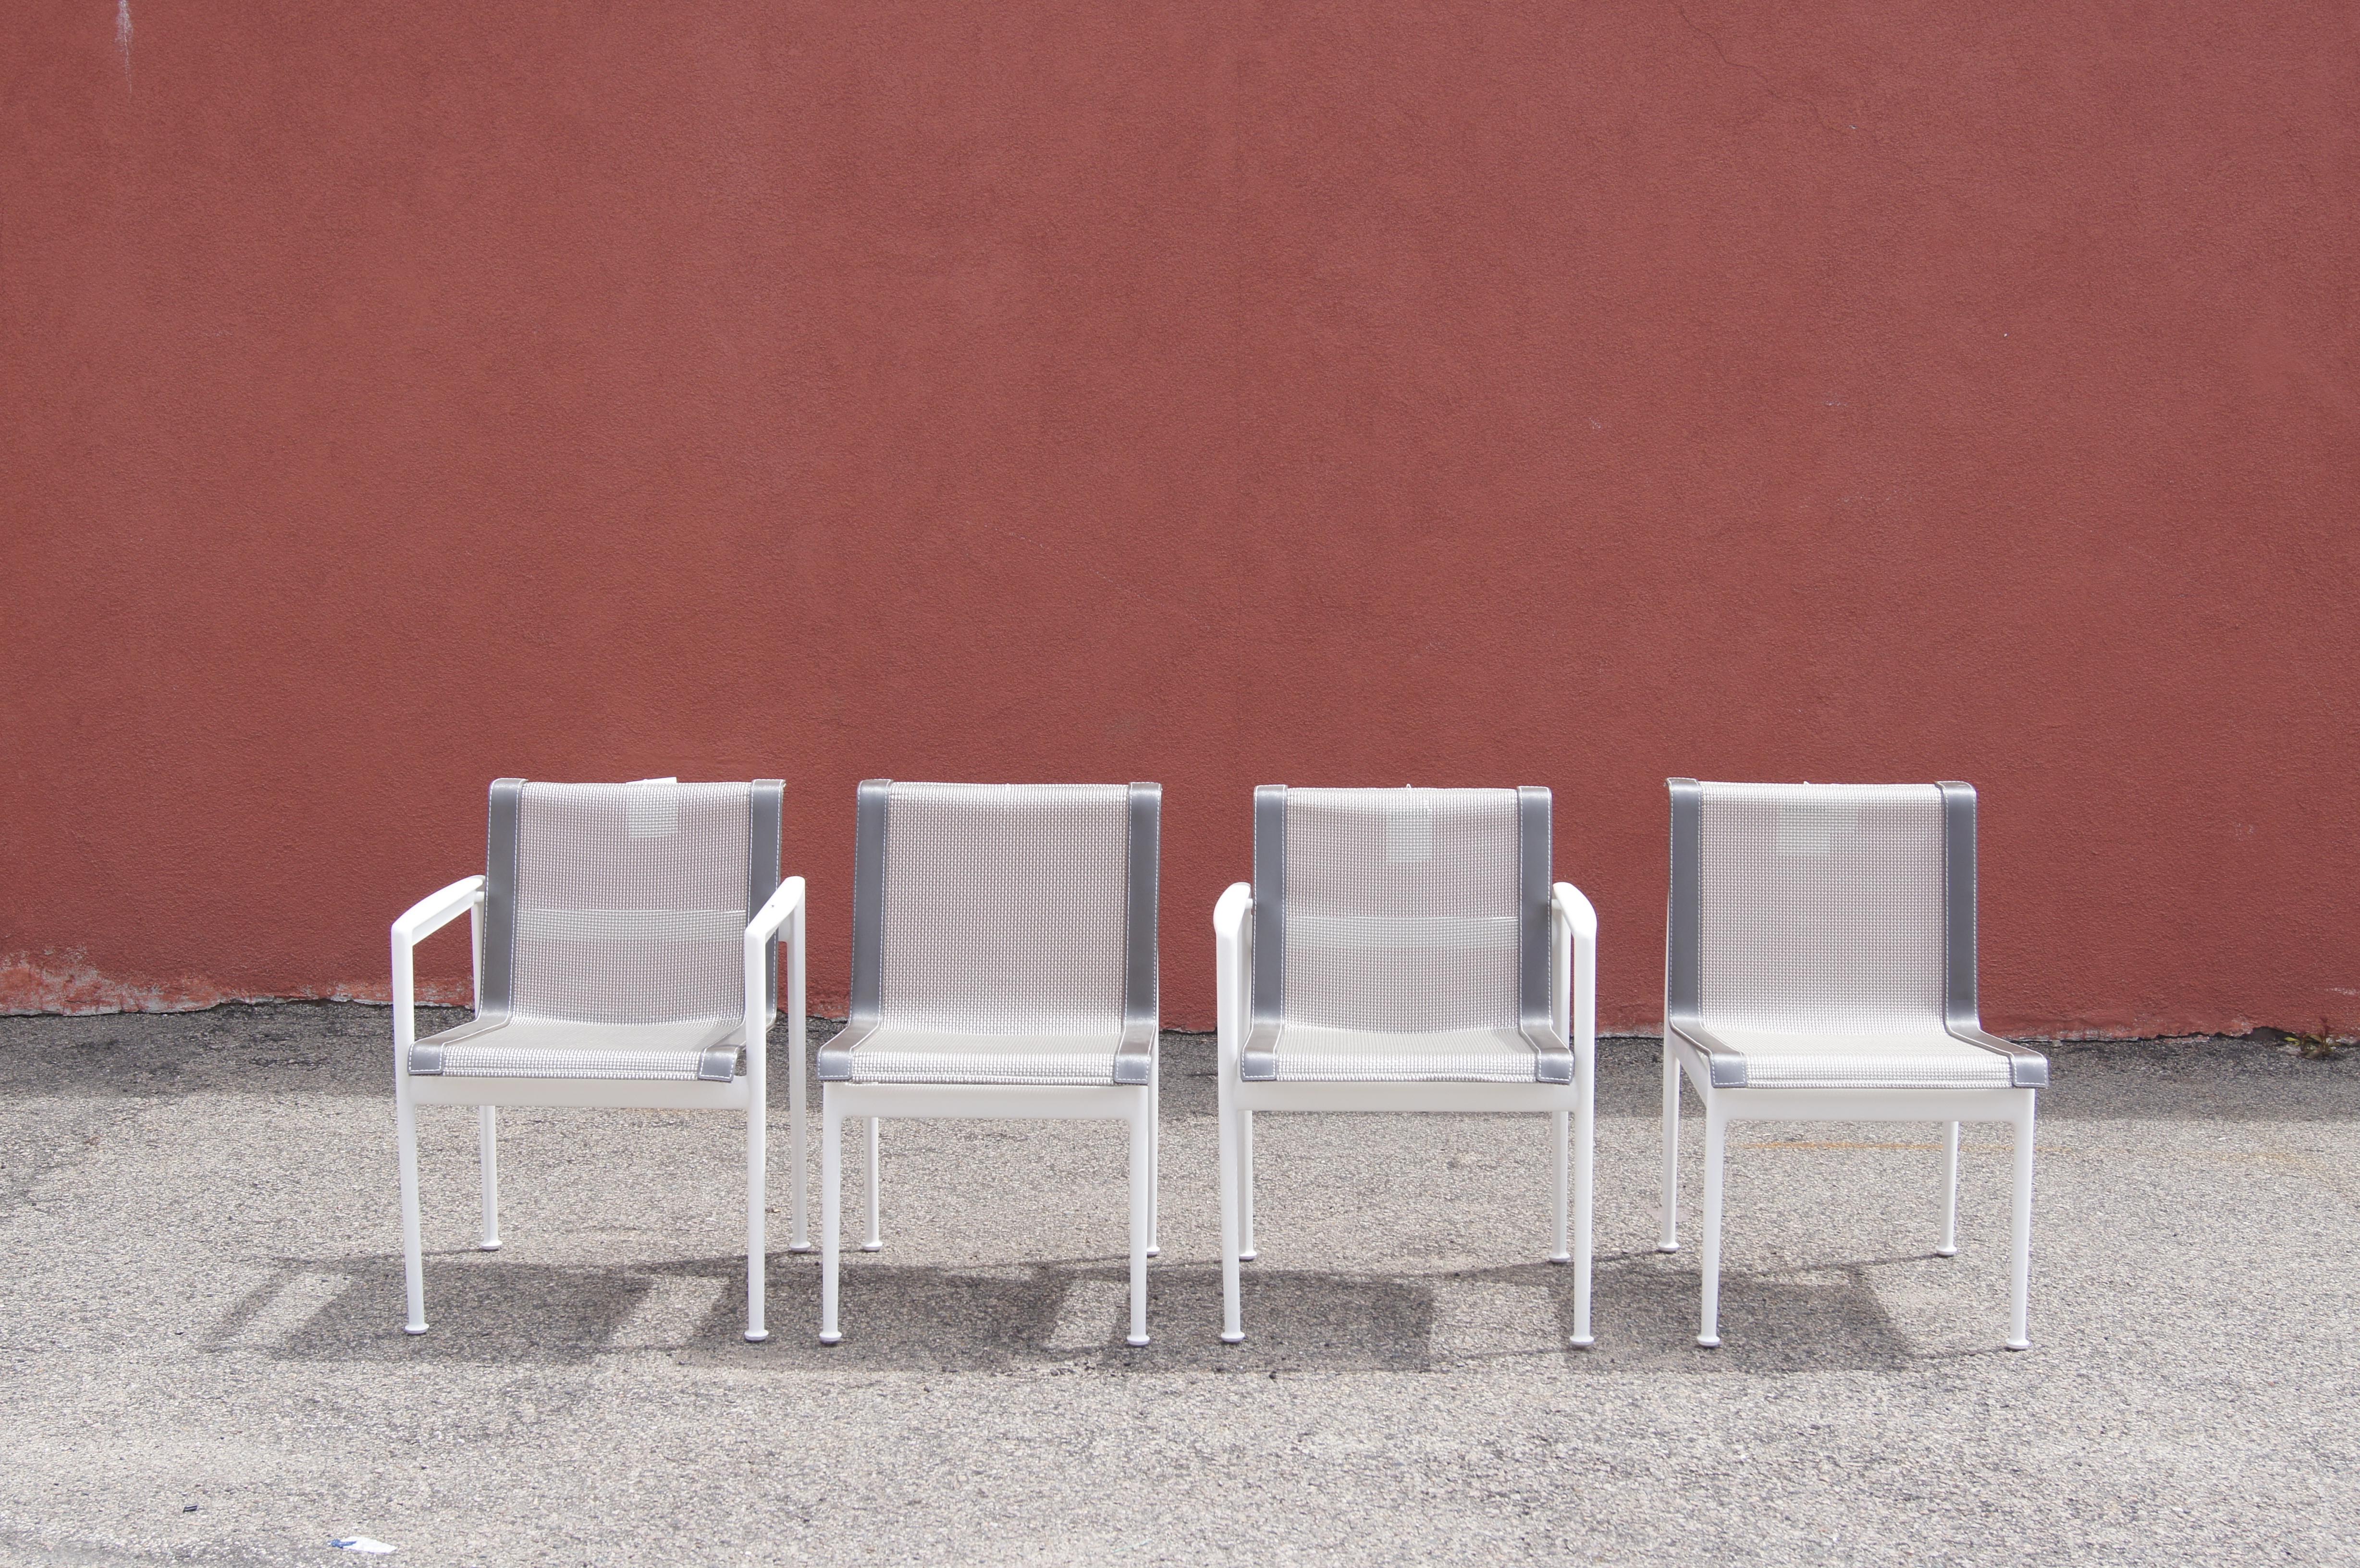 Originally designed by Richard Schultz for Florence Knoll, these later productions of his classic 1966 outdoor chairs were produced by Richard Schultz Designs just after the company was purchased by Knoll. 

The white powdered-coated aluminum frames